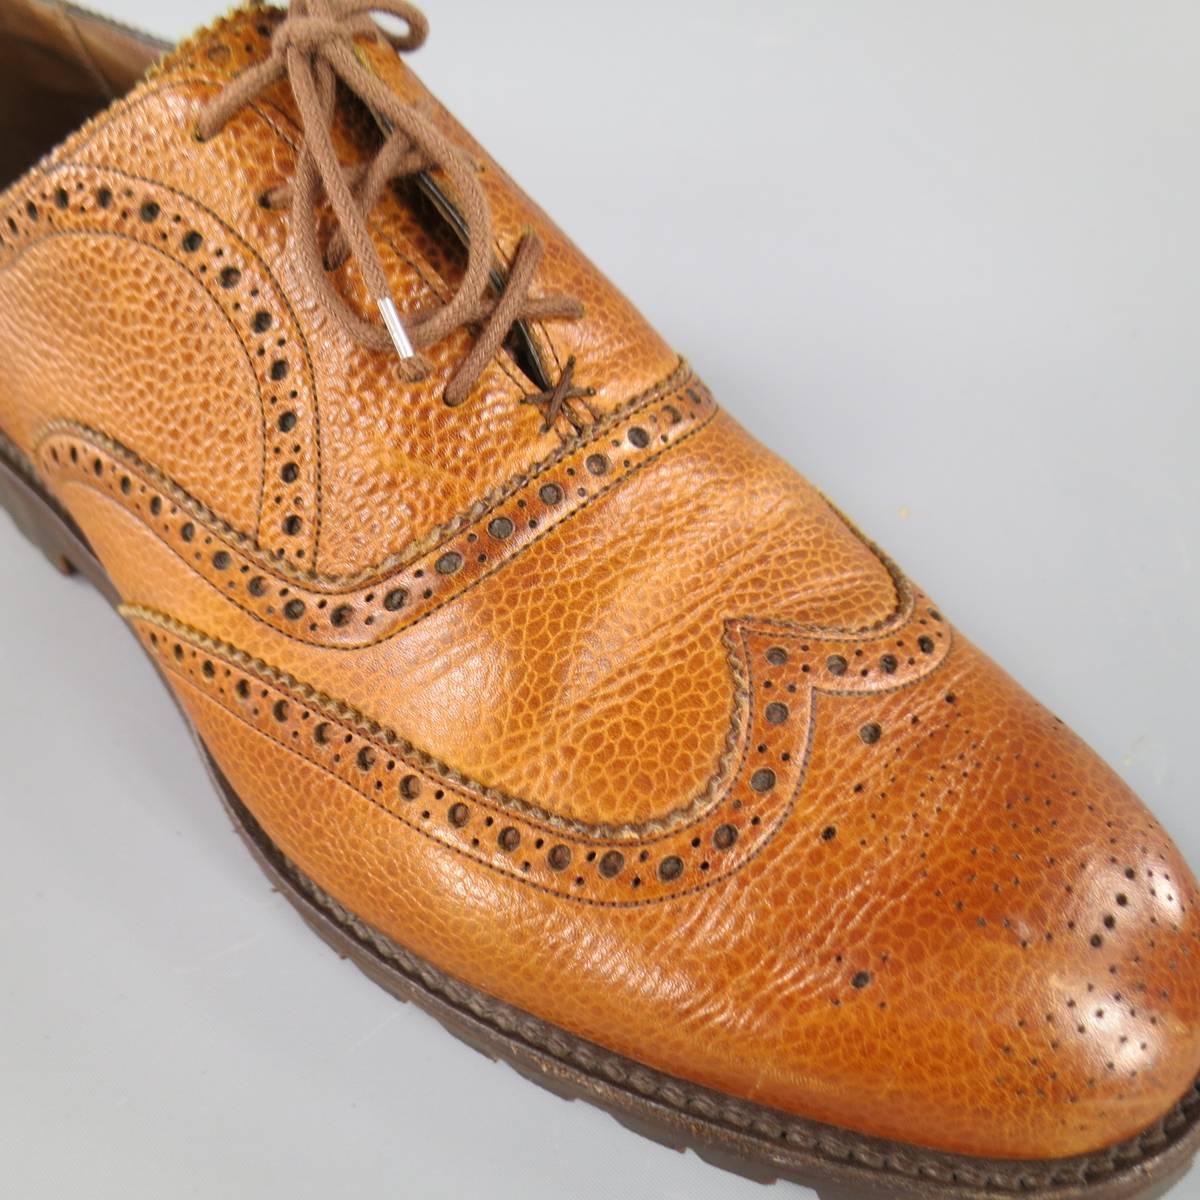 These BARKER BLACK dress shoes come in rich caramel tan pebbled leather with a wingtip, brogue details, and Vibram commando sole. With Box. Made in England. Retails at $825.00.
 
Good Pre-Owned Condition.
Marked: 9 1/2
 
12.5 x 4.5 in.